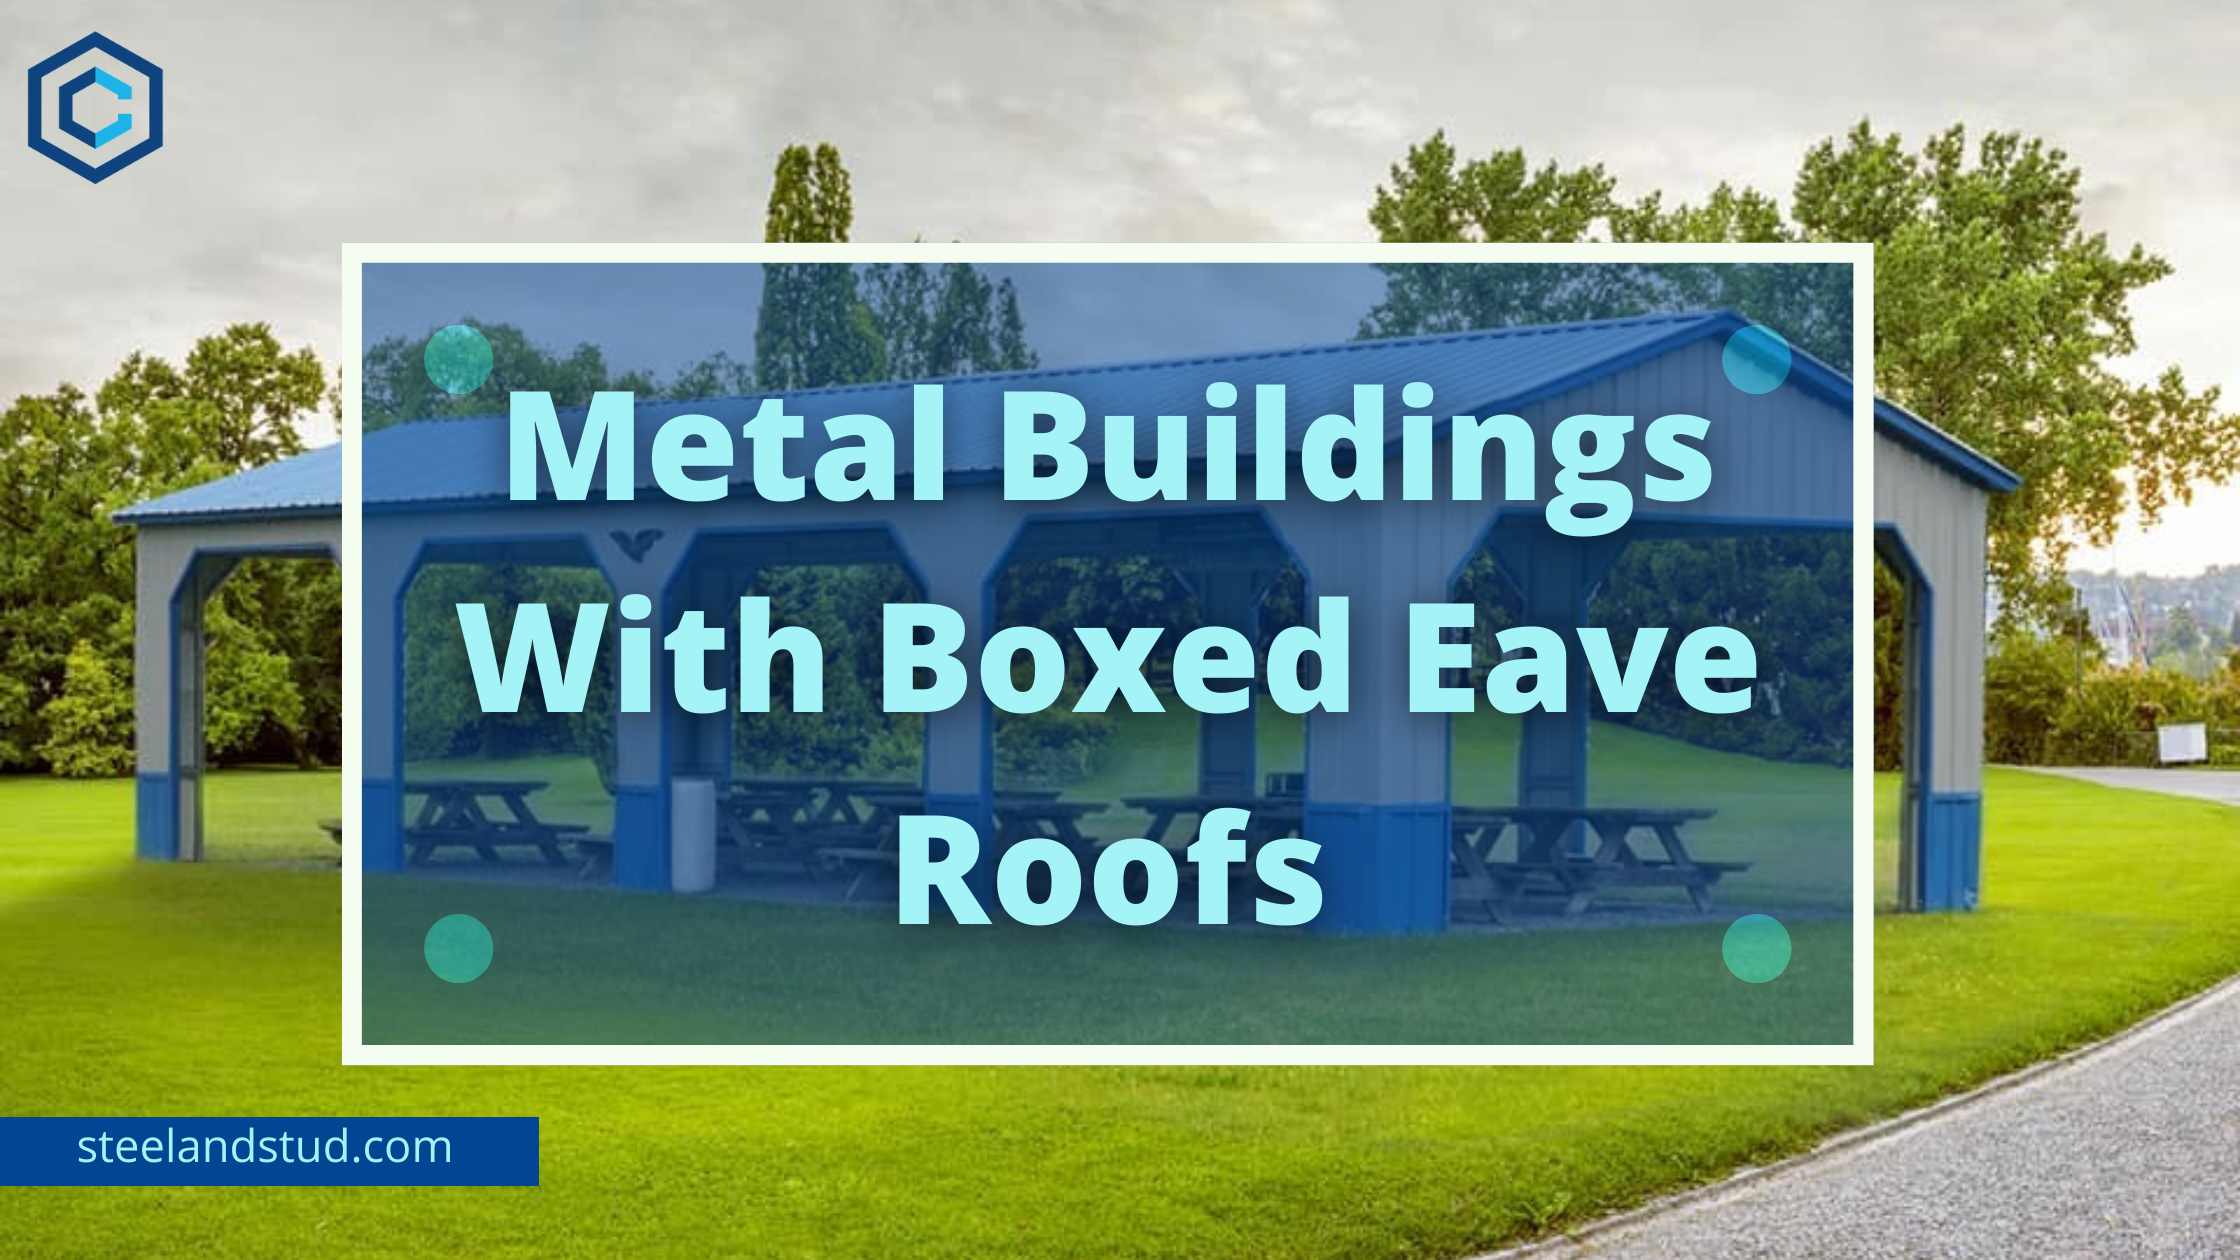 What to Know About Metal Buildings With Boxed Eave Roofs